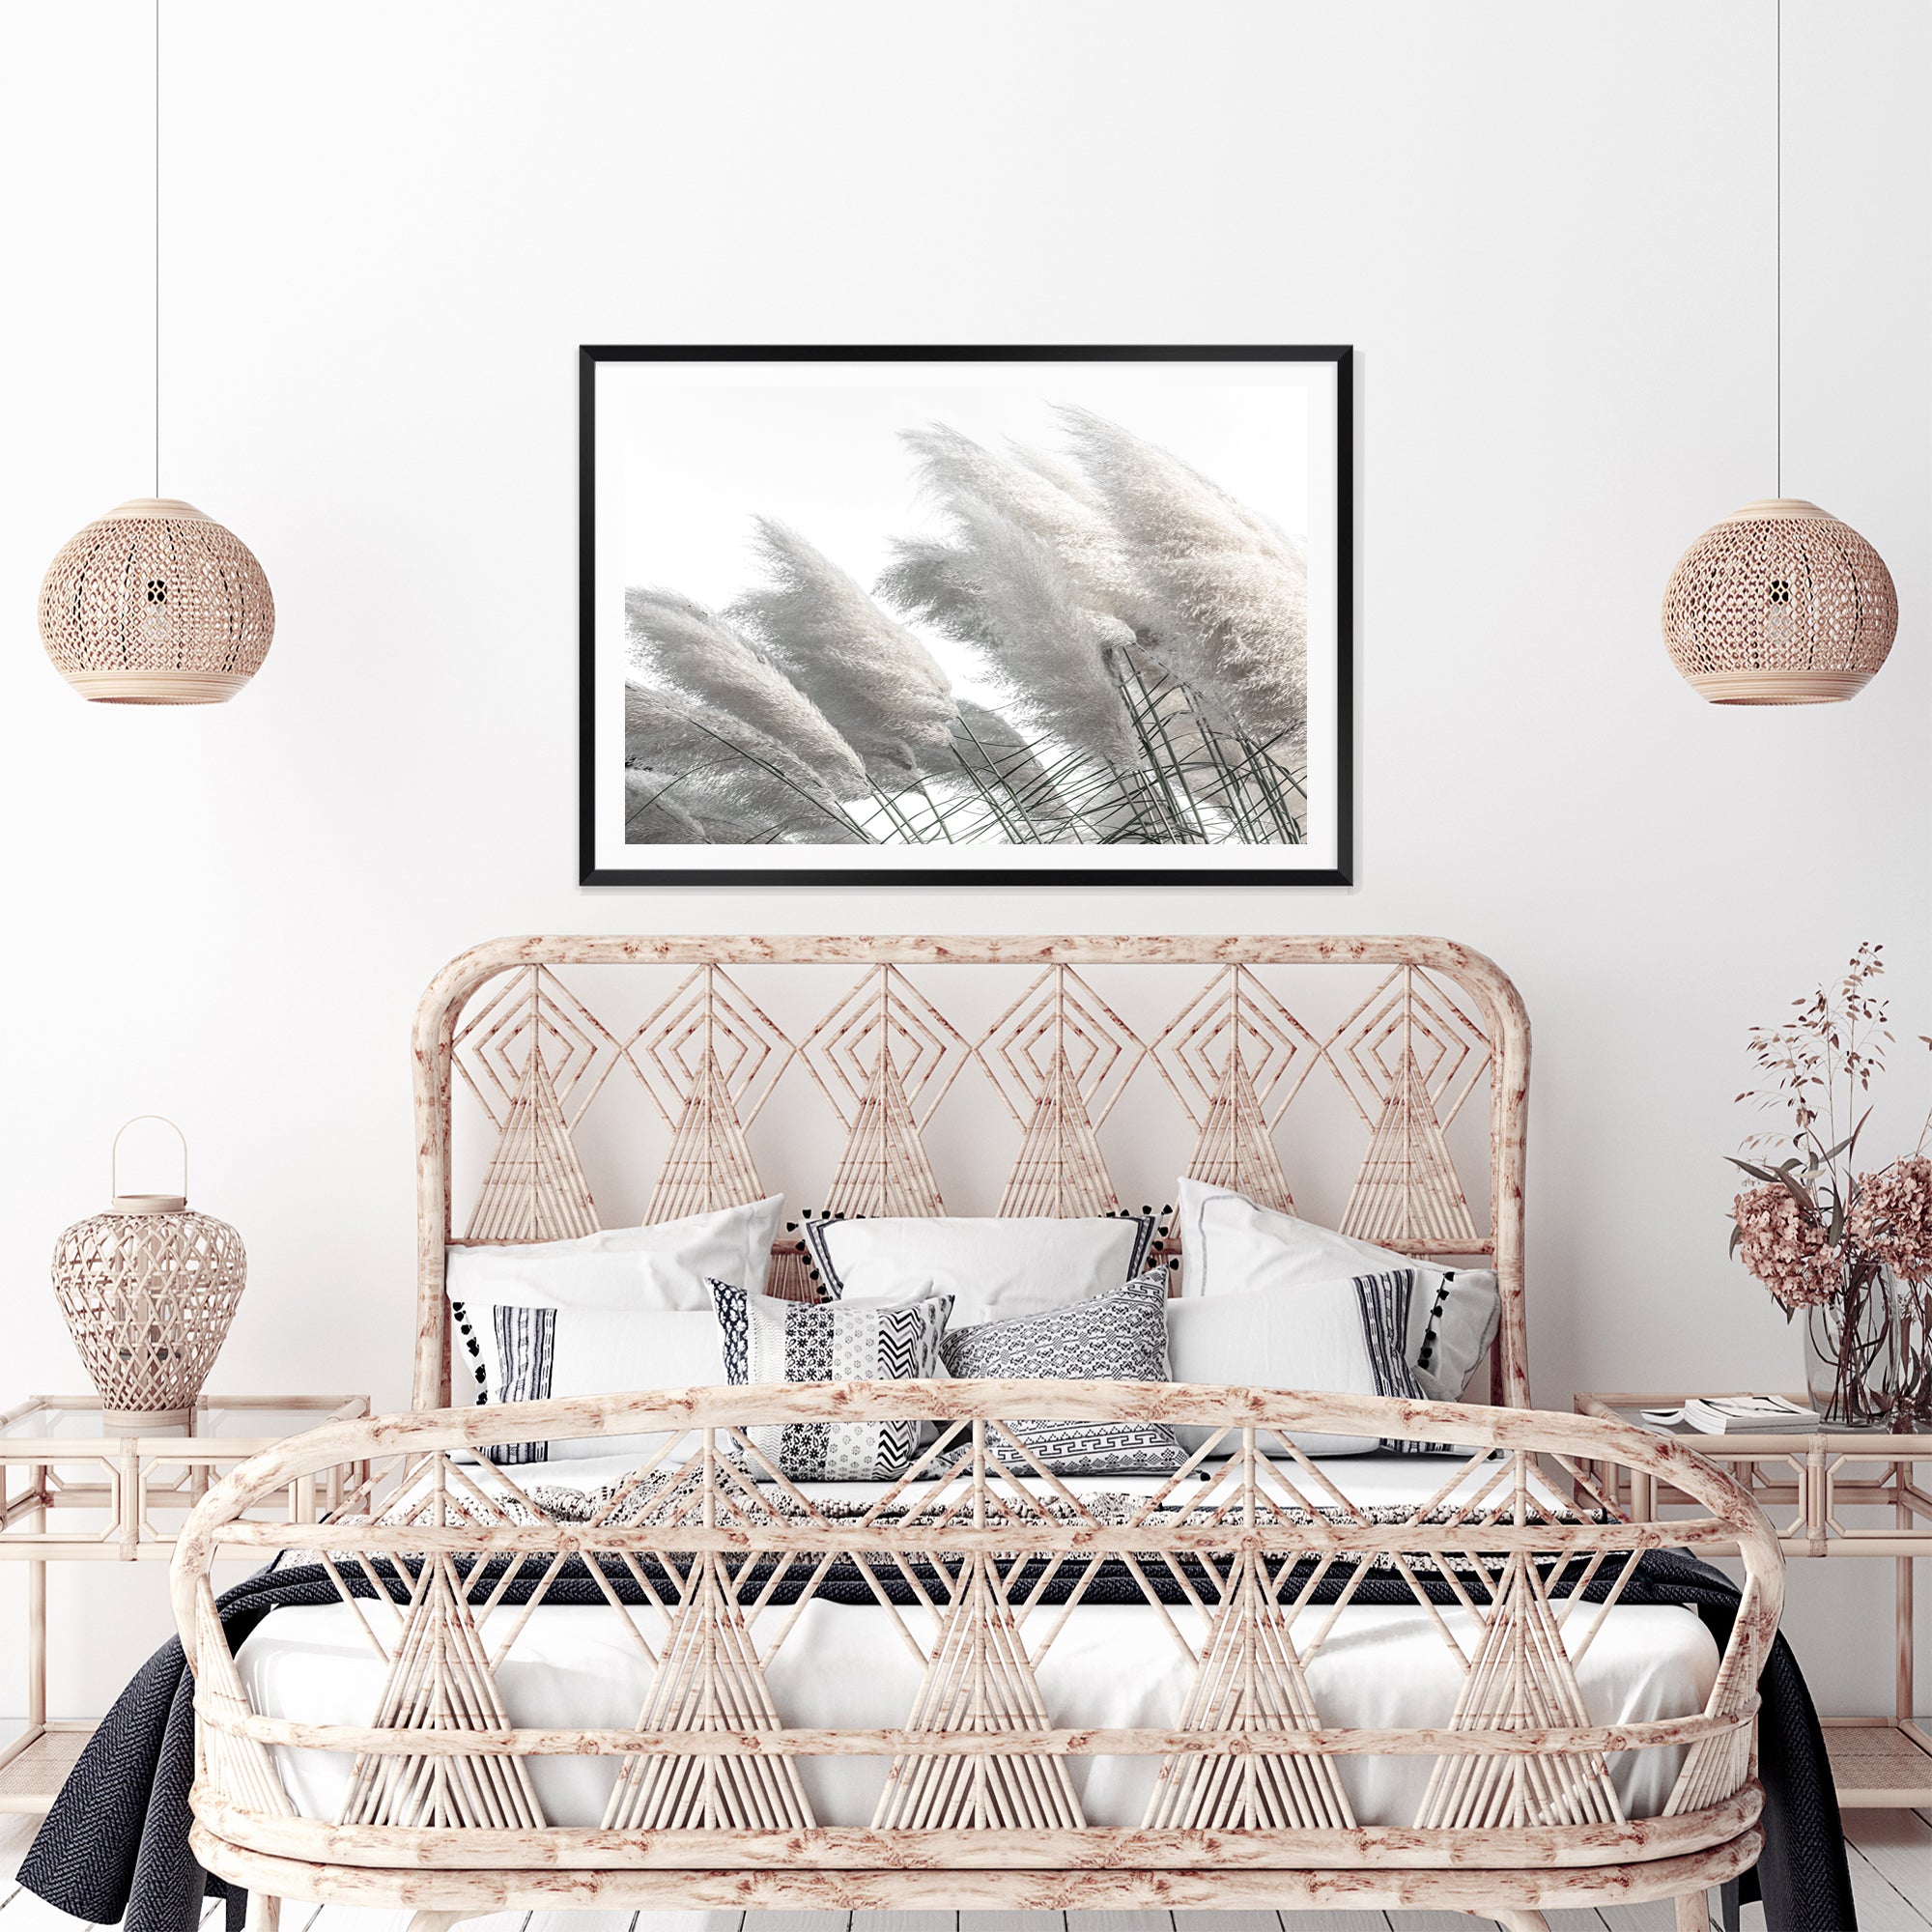 Shop Online a Hamptons stretched canvas artwork of pampas grass in neutral tones available framed or unframed in timber, black or white frames.